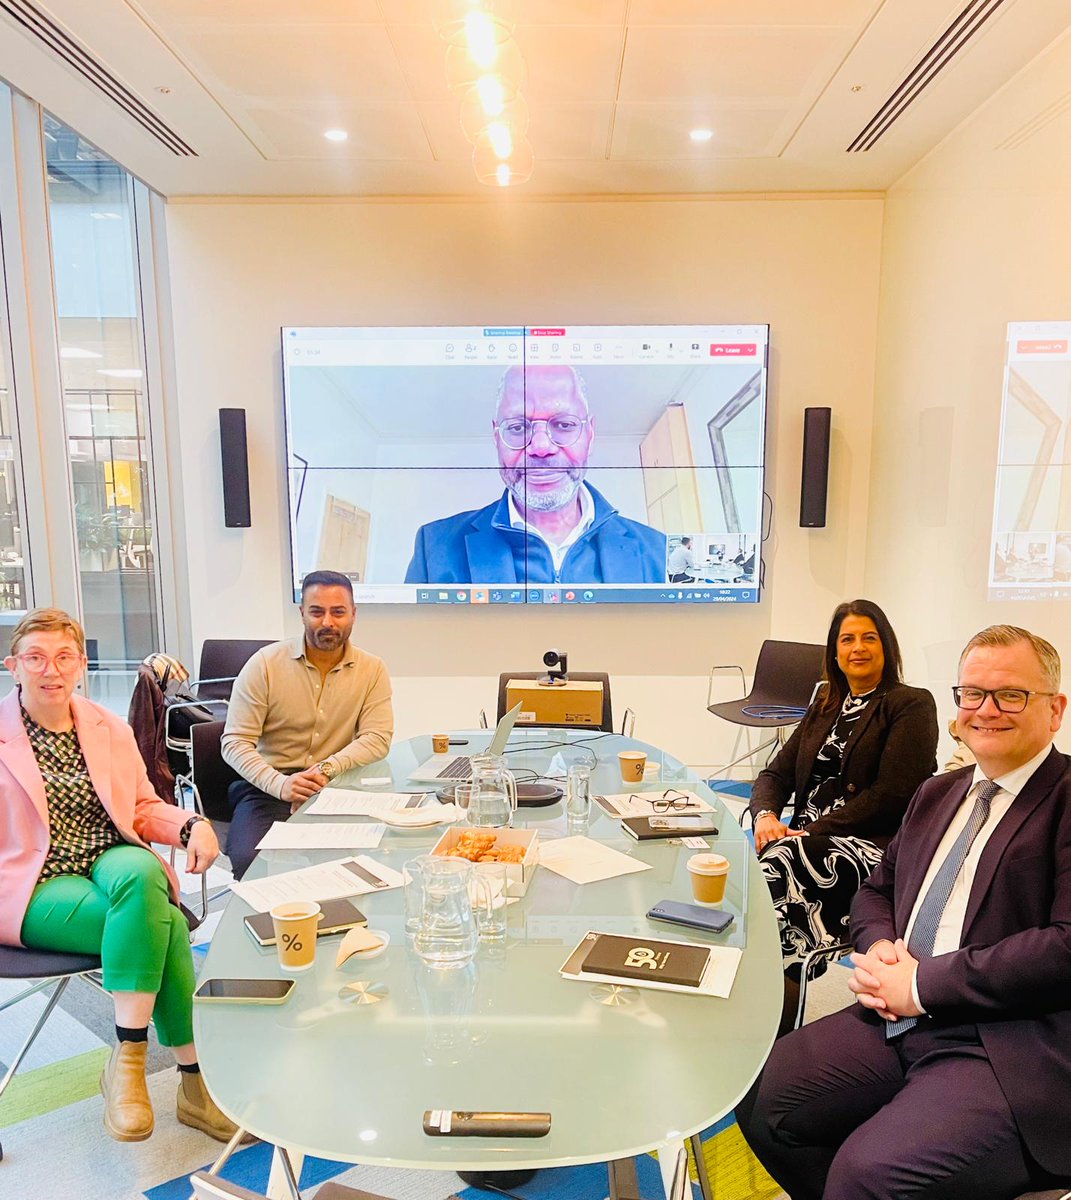 Today, @dawarhash chaired @themjcouk's #ChiefExec of the Year award panel, hearing from inspiring #localauthority leaders. Thanks to Special thanks to our wonderful judges, Kate Kennally, Bindu Arjoon, @SSMoir, Mel Barrett, Sharon K. and Bayo Dosunmu. #LocalGov #Leadership